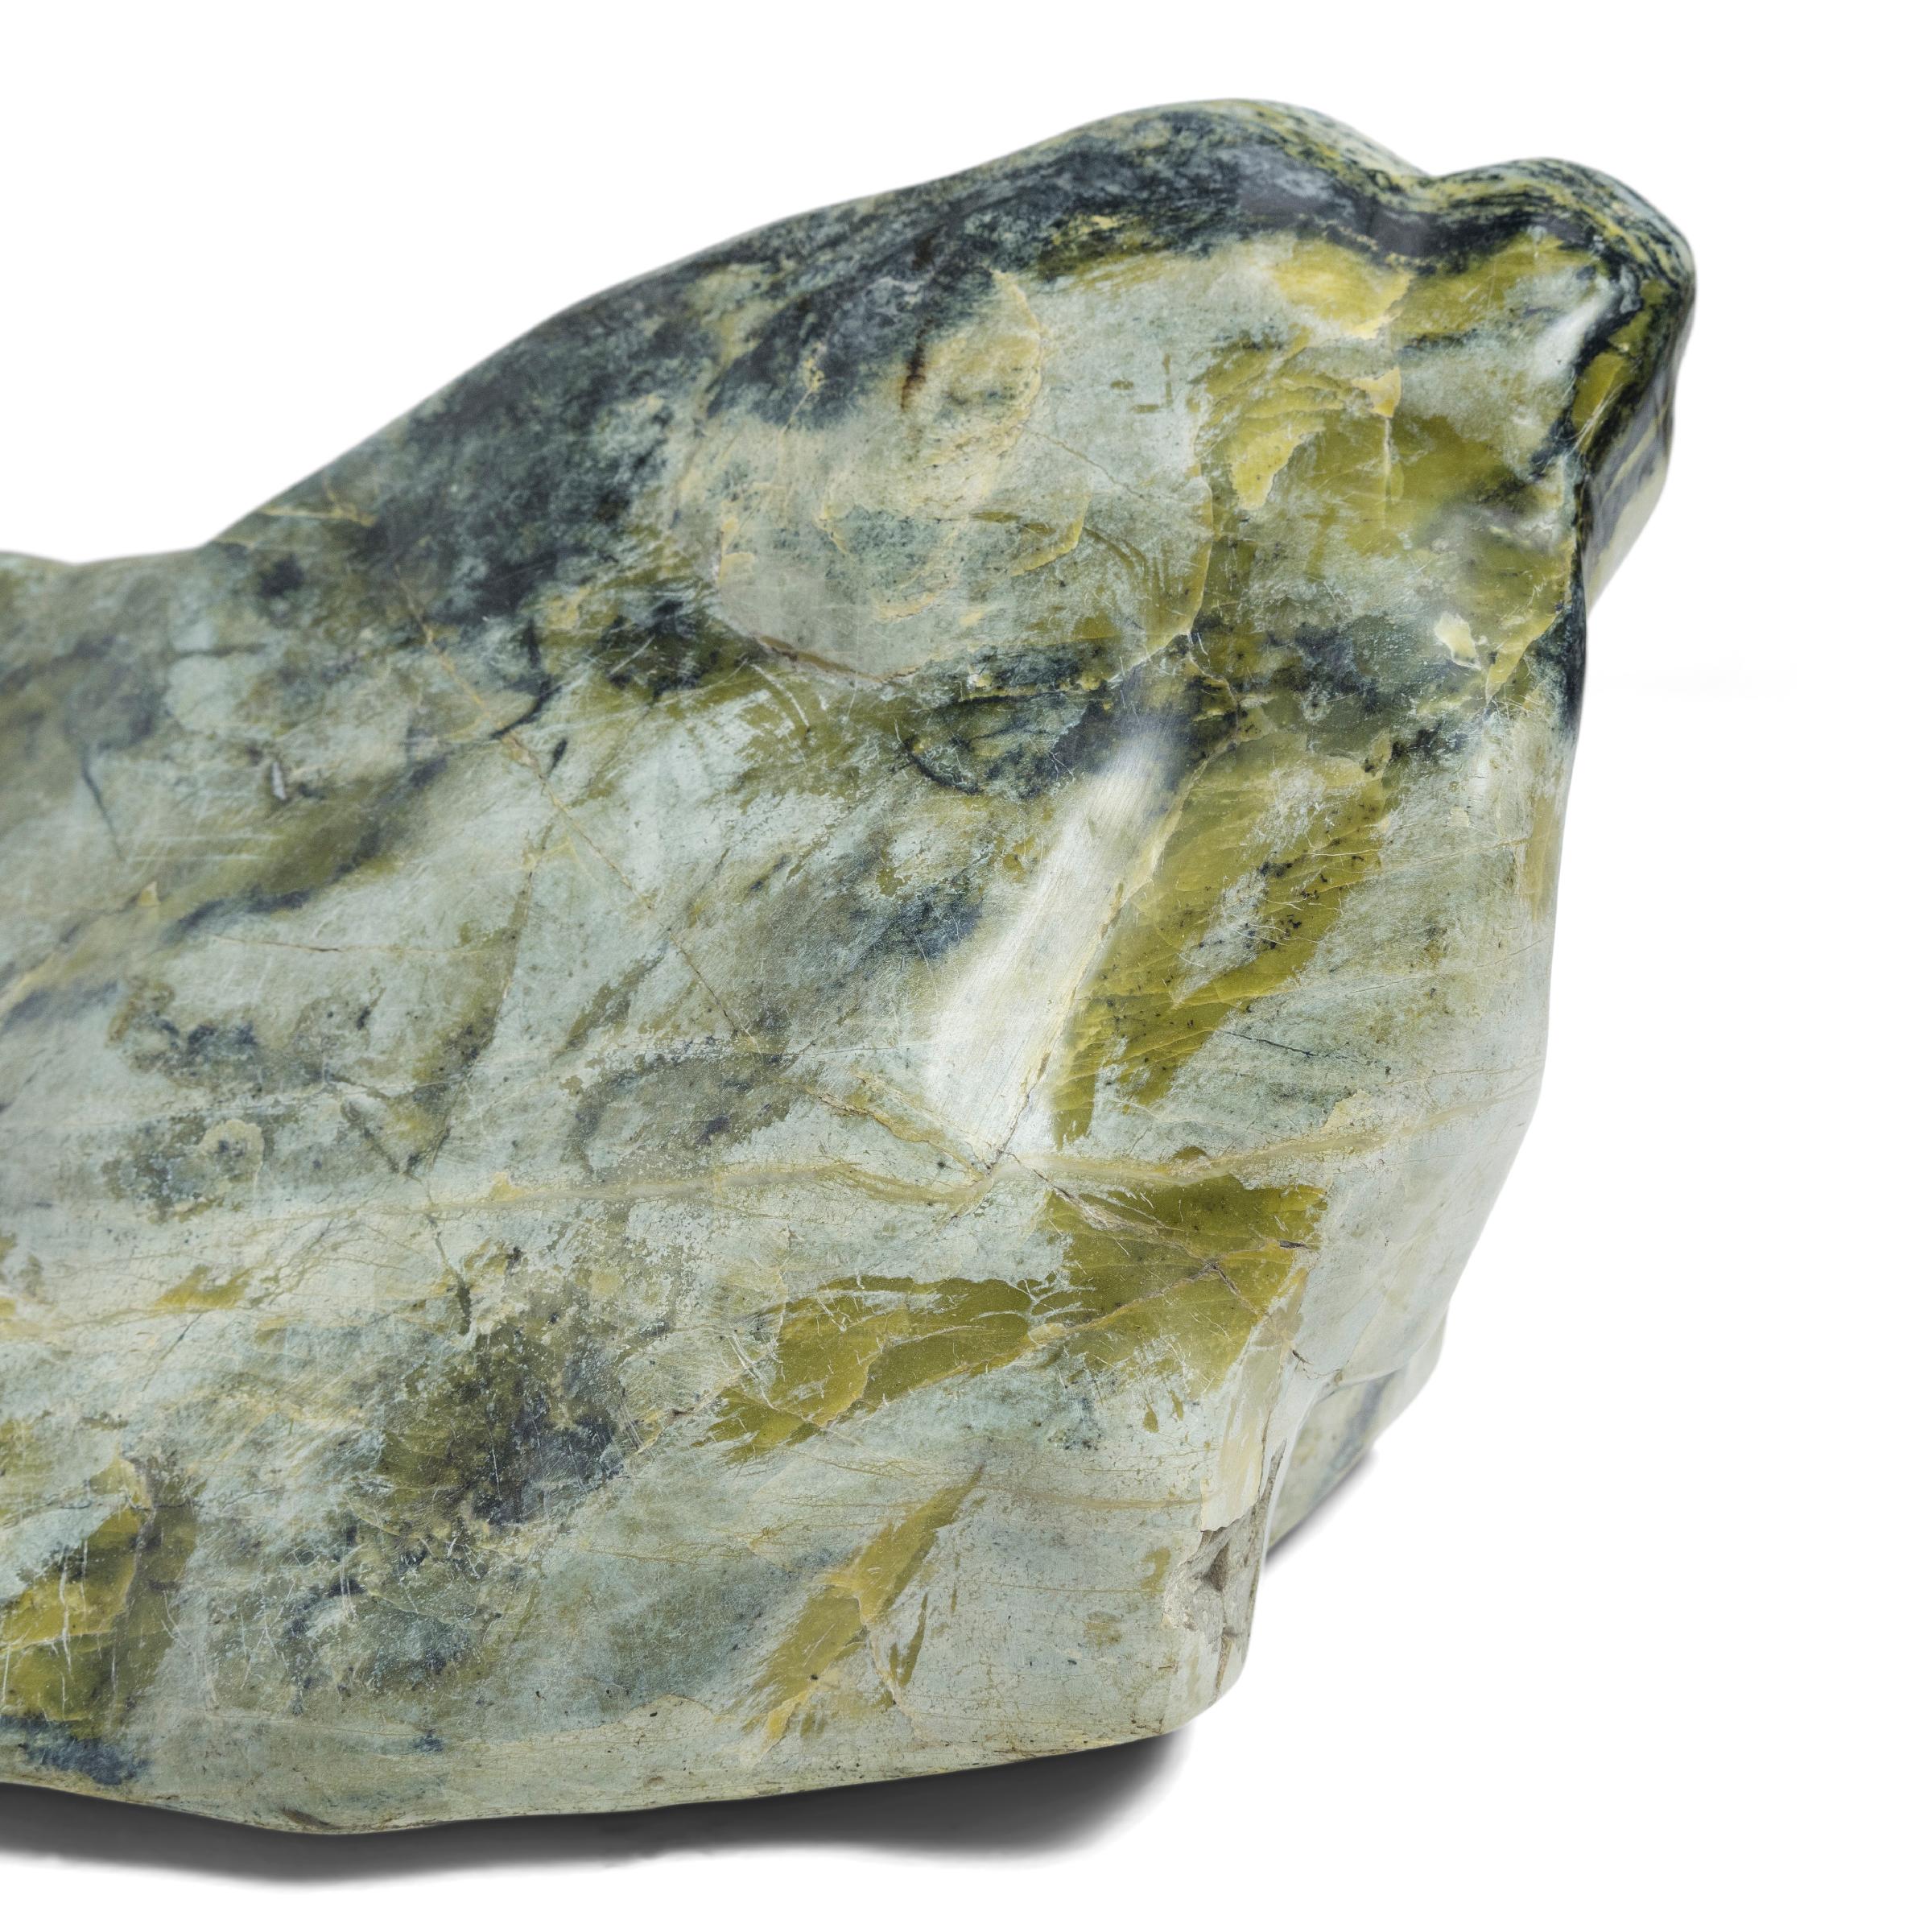 Following the sculpted form, marbled coloring, and natural veining of this one-of-a-kind stone can be deeply meditative. Viewed as a source of beauty and creativity, Chinese scholar-artists would decorate their studios and gardens with similar